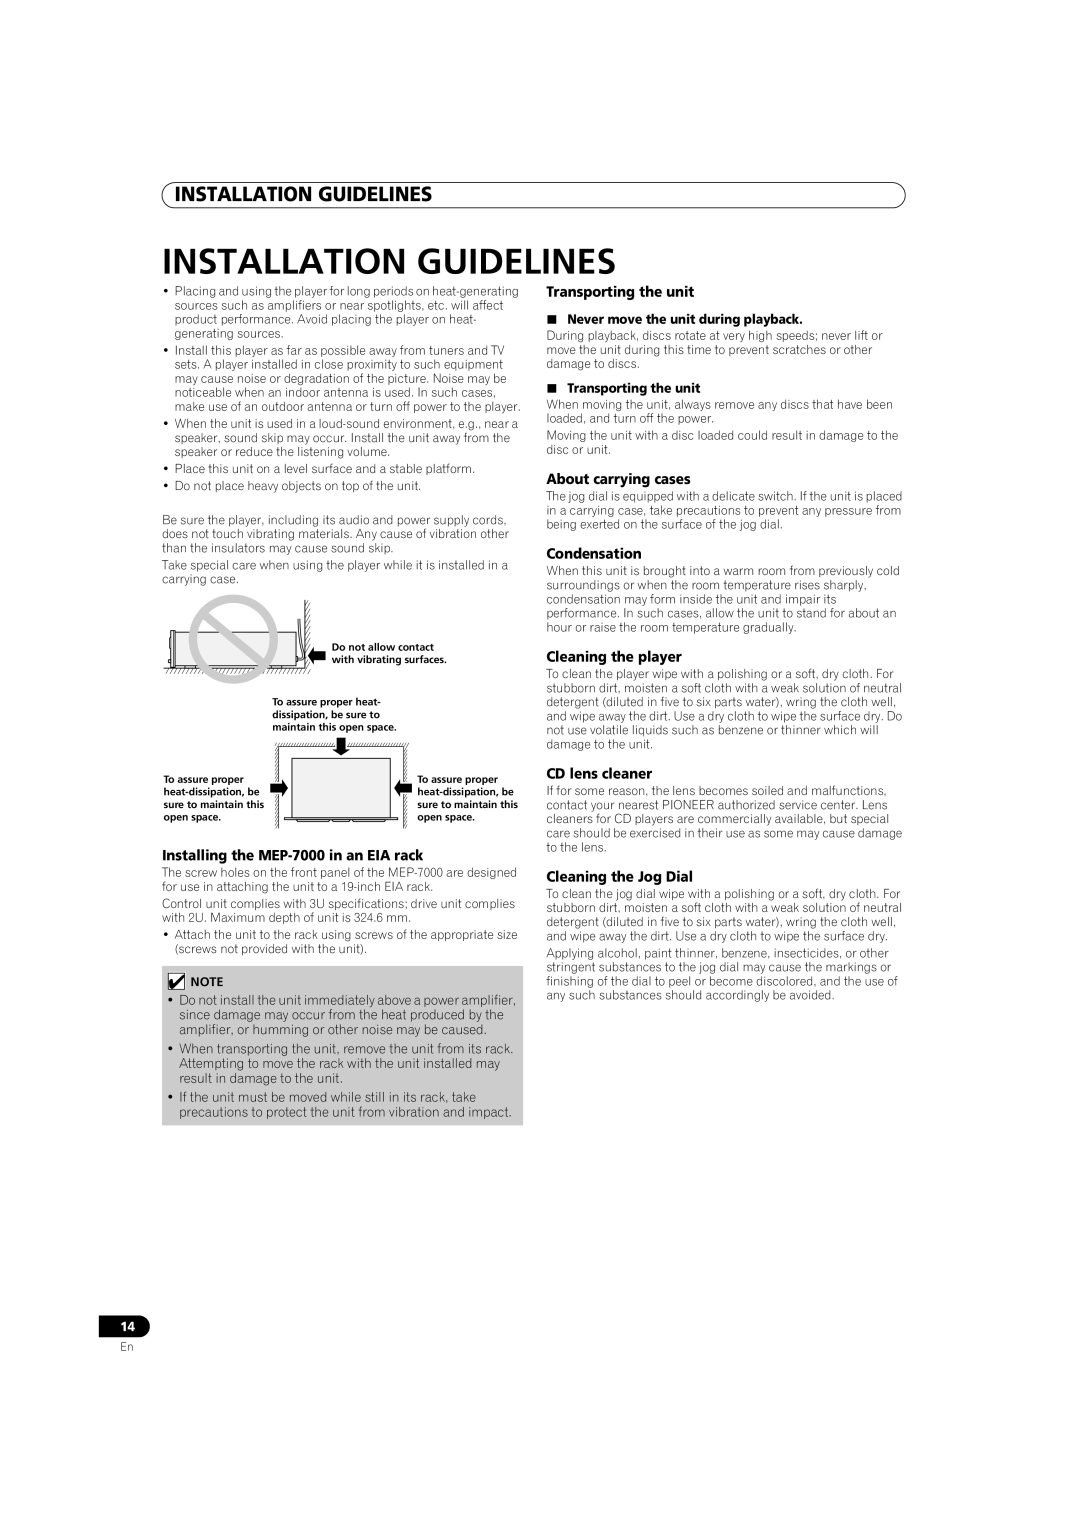 Pioneer MEP-7000 Installation Guidelines, Never move the unit during playback, Transporting the unit 